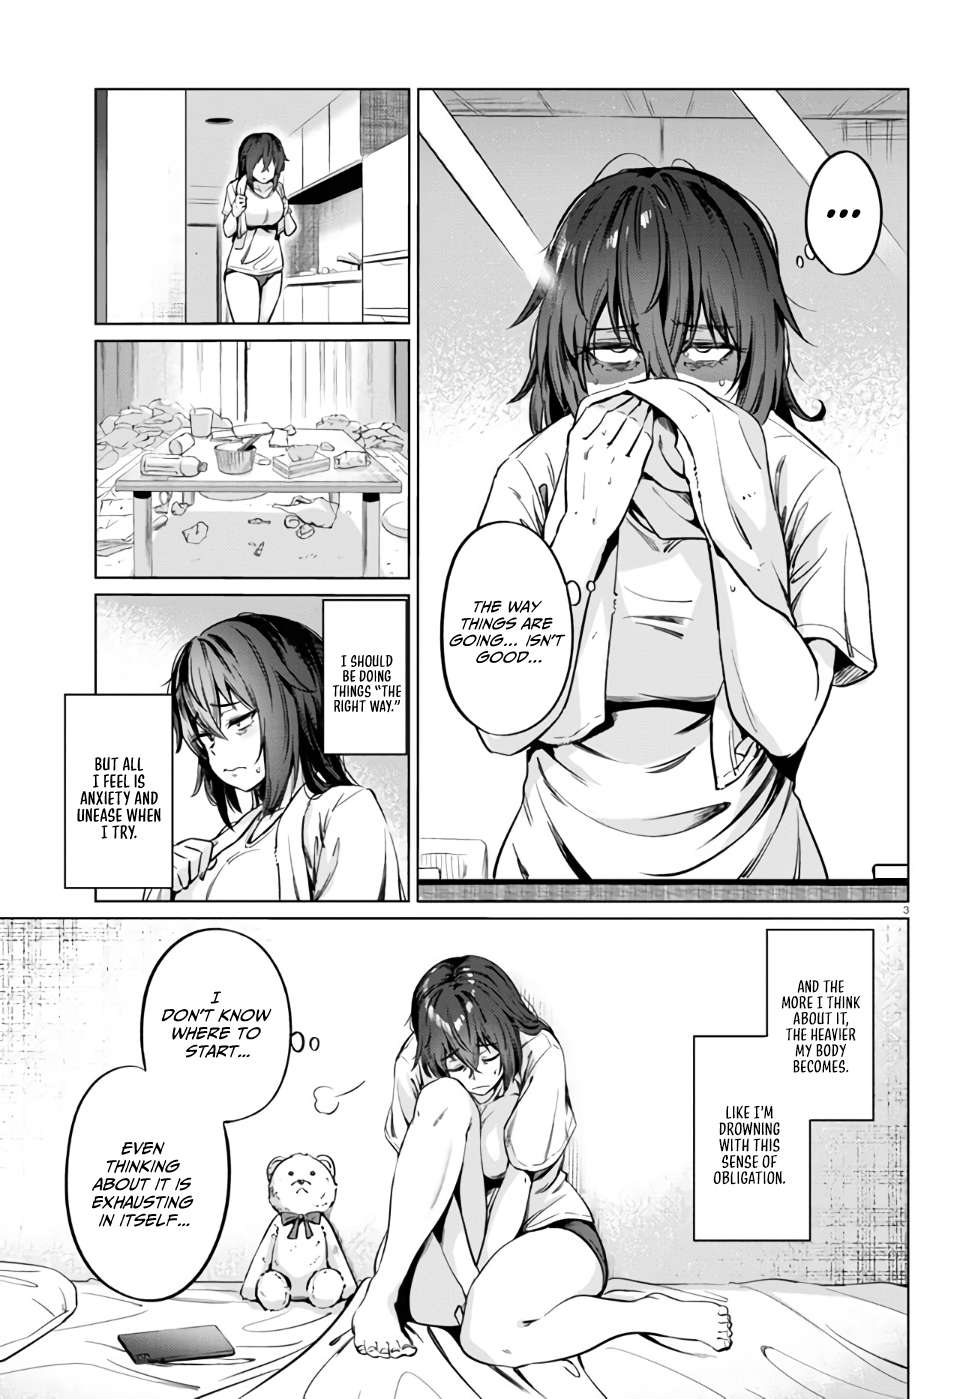 The Suffering Of A 26 Year Old Unloved Female Doomer - chapter 5 - #4